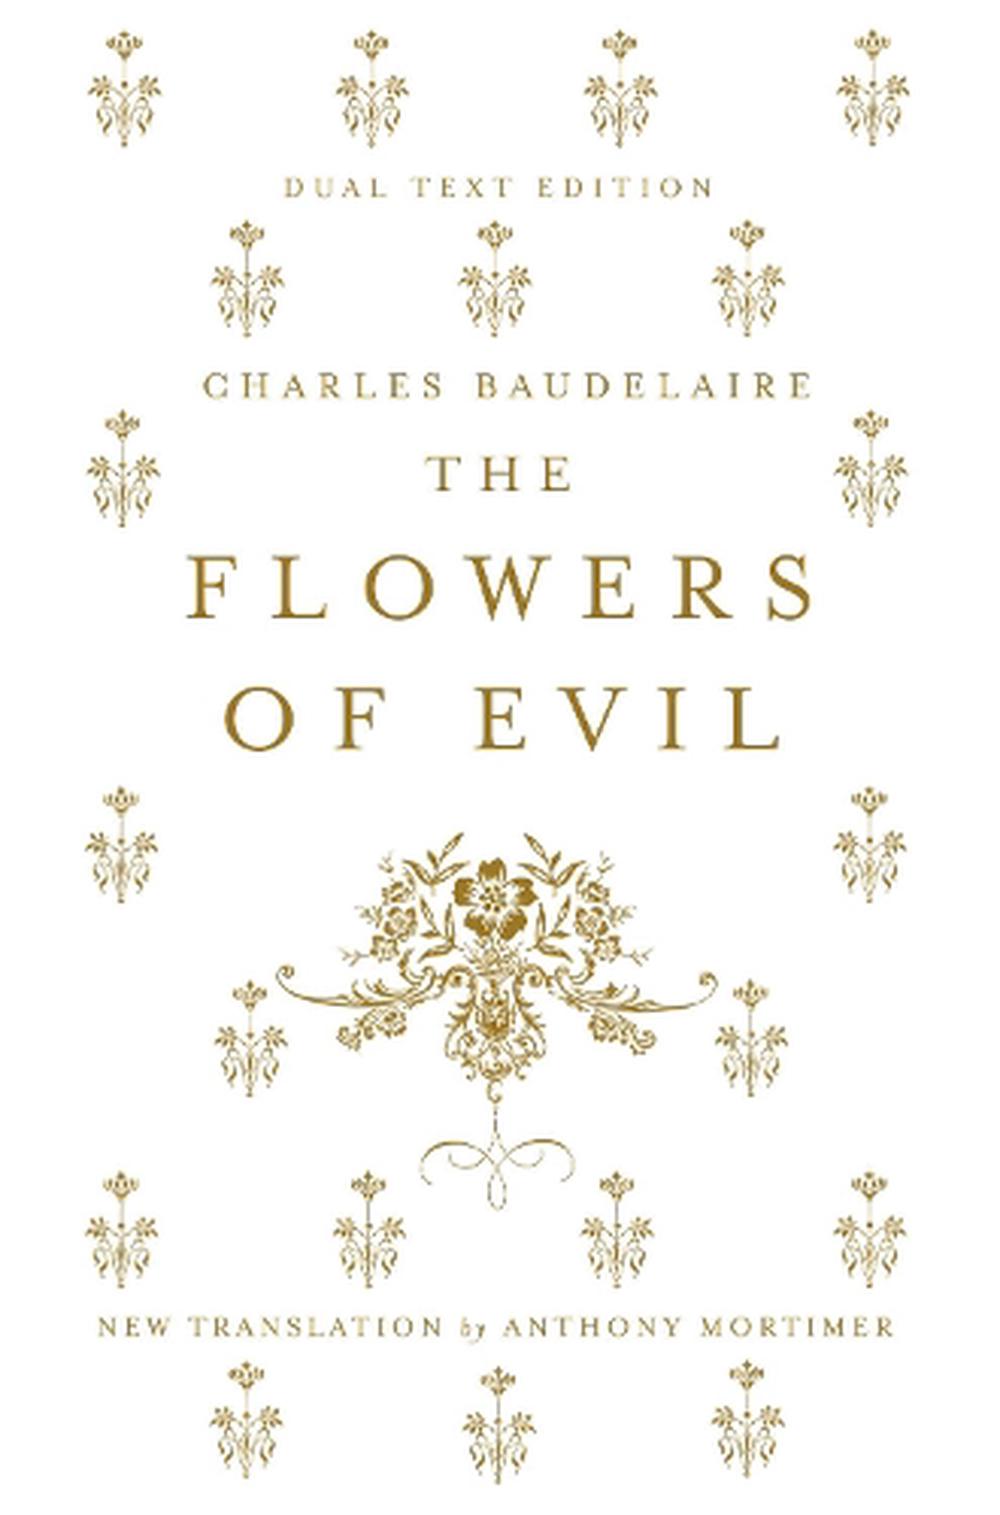 Flowers of Evil by Charles Baudelaire (English) Paperback Book Free ...